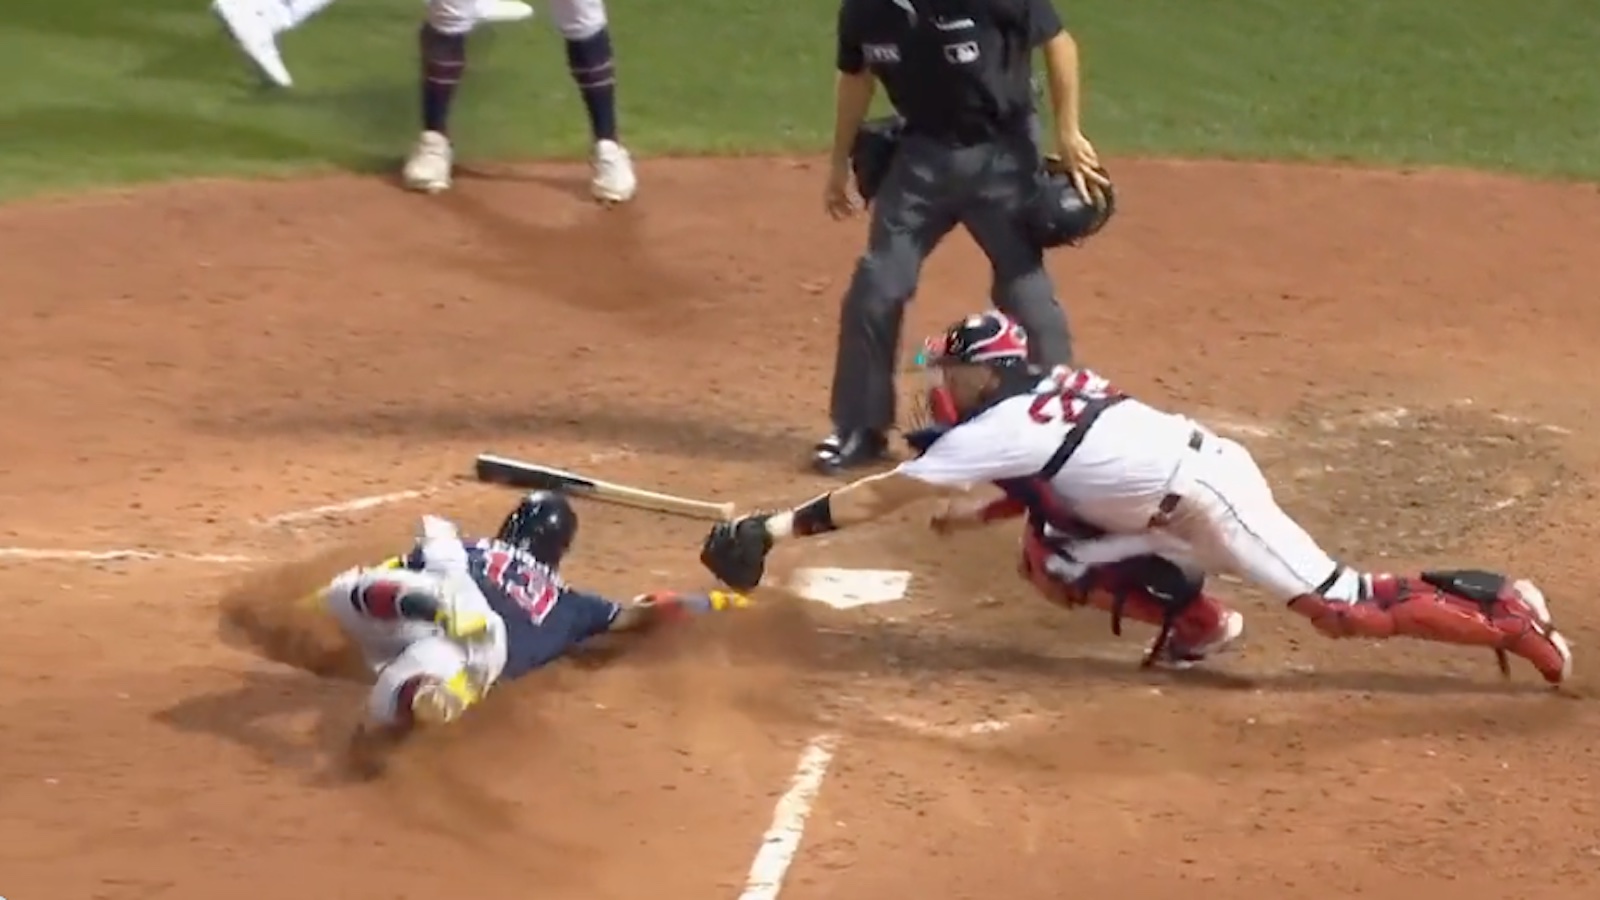 Ronald Acuña Jr scores on incredible slide into home